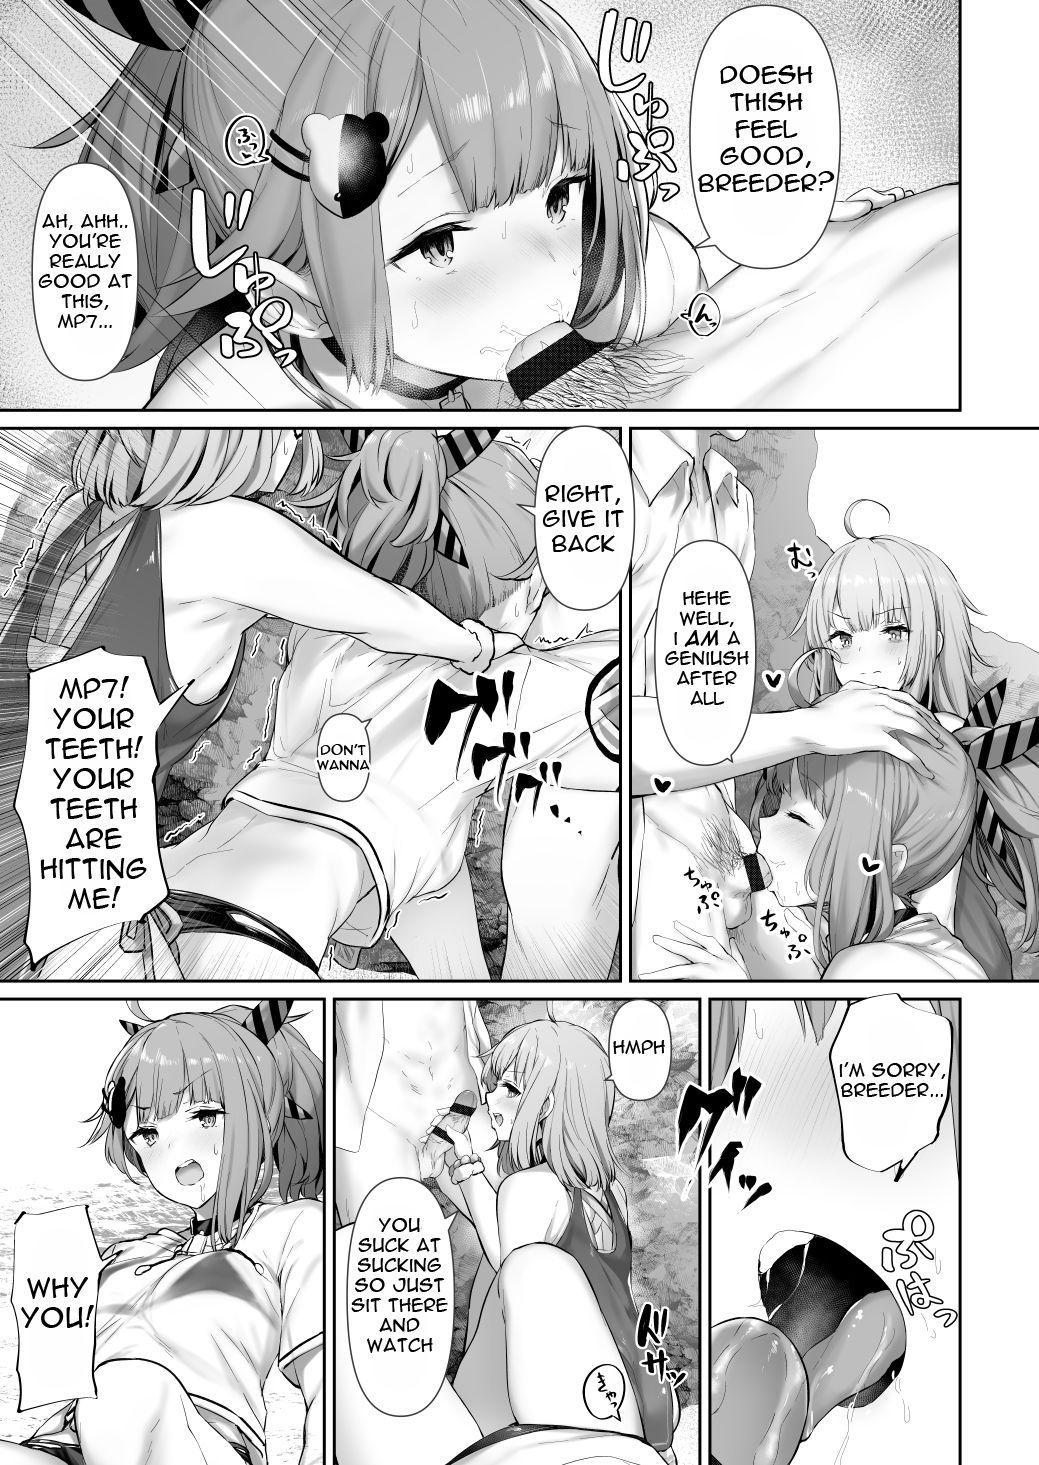 Gaypawn MP7 and AA-12 no - Girls frontline Rough Fucking - Page 3